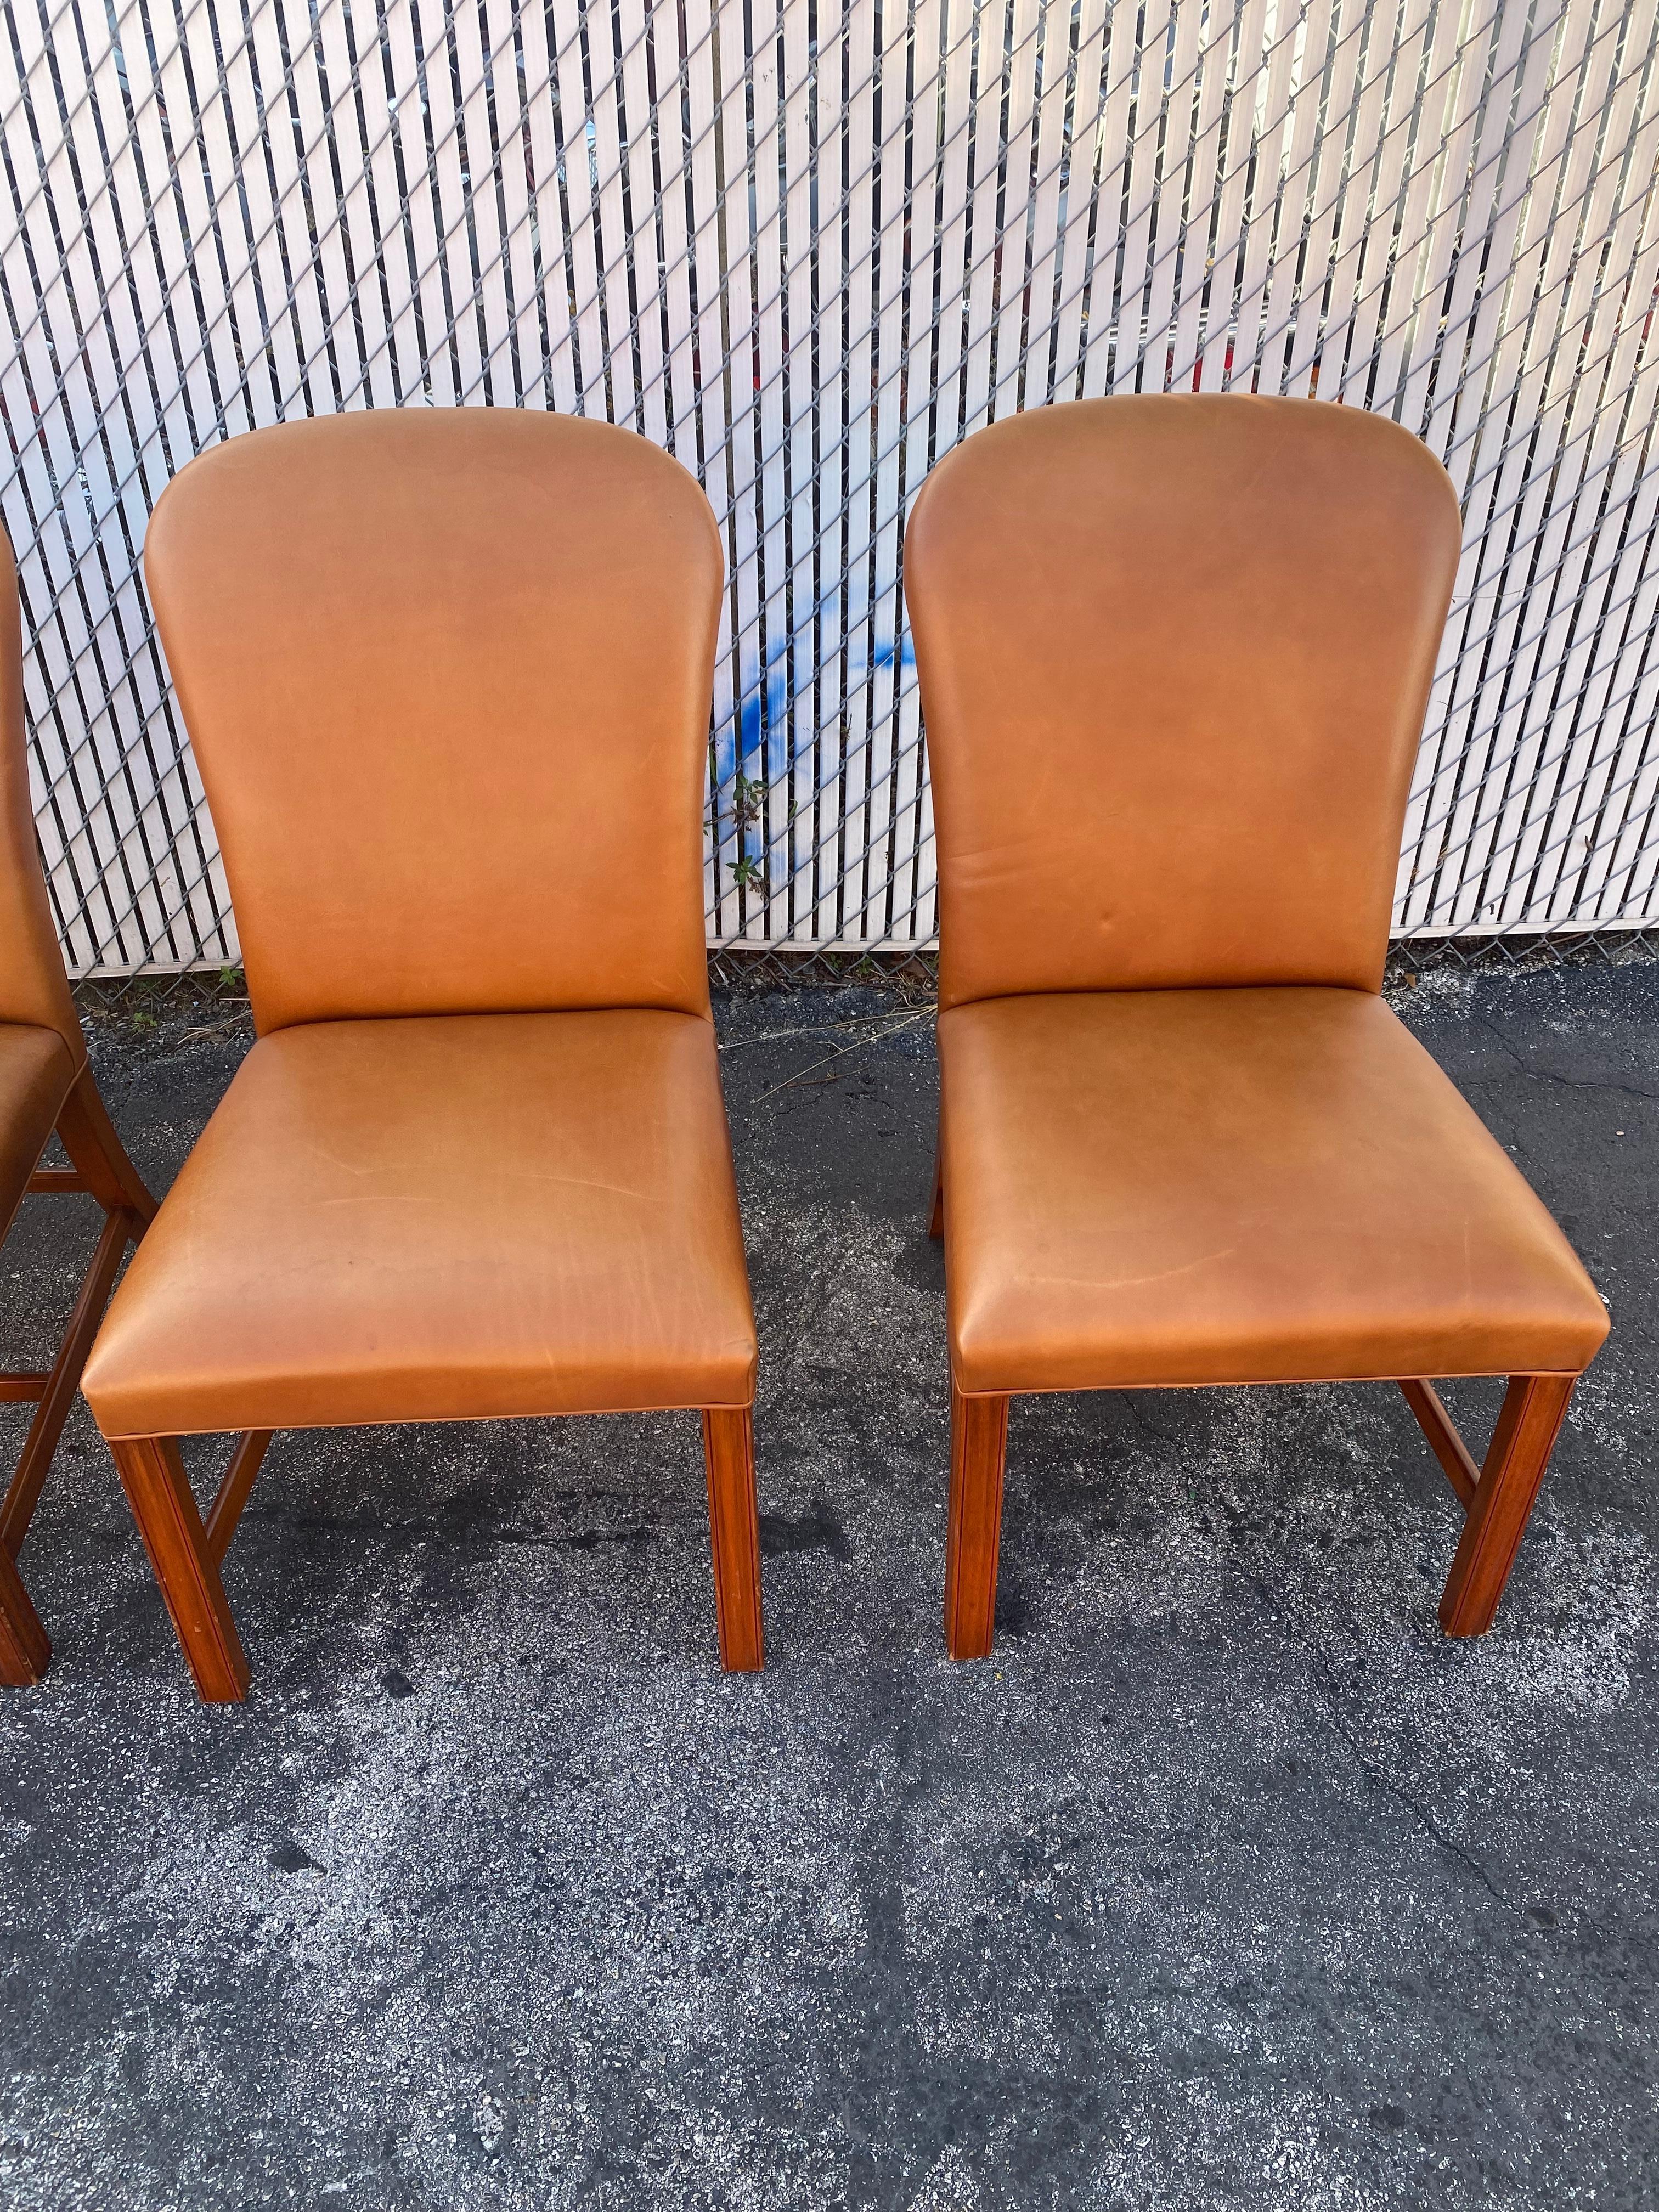 2000s Ralph Lauren Saddle Leather Dining Chairs, Set of 4 For Sale 1